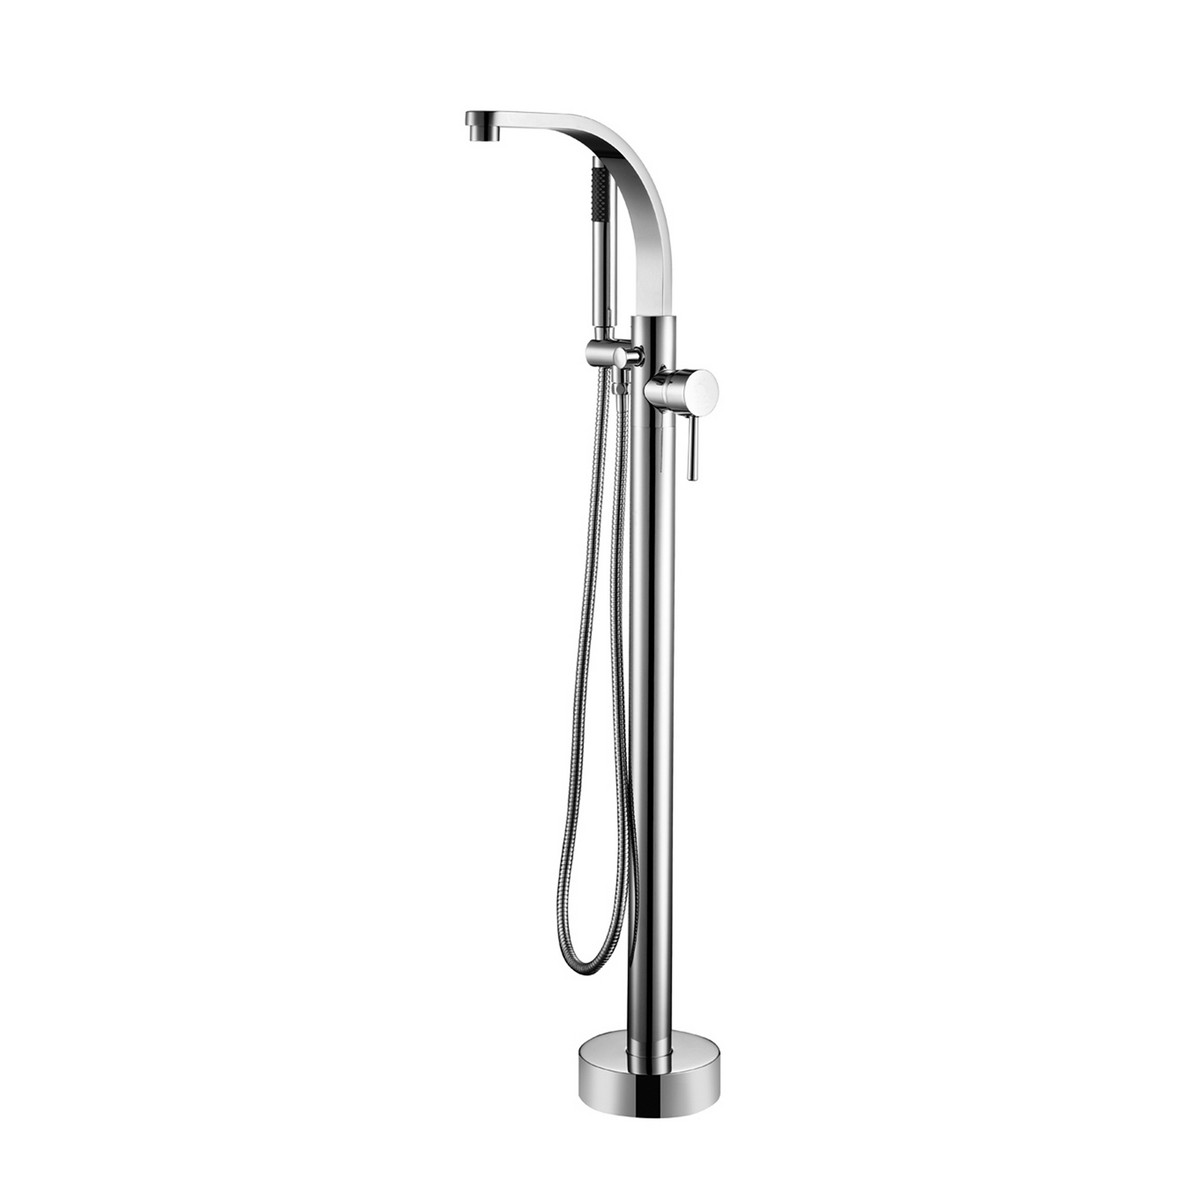 BARCLAY 7968 GRIMLEY 43 INCH SINGLE HOLE FREESTANDING TUB FILLER WITH HAND SHOWER